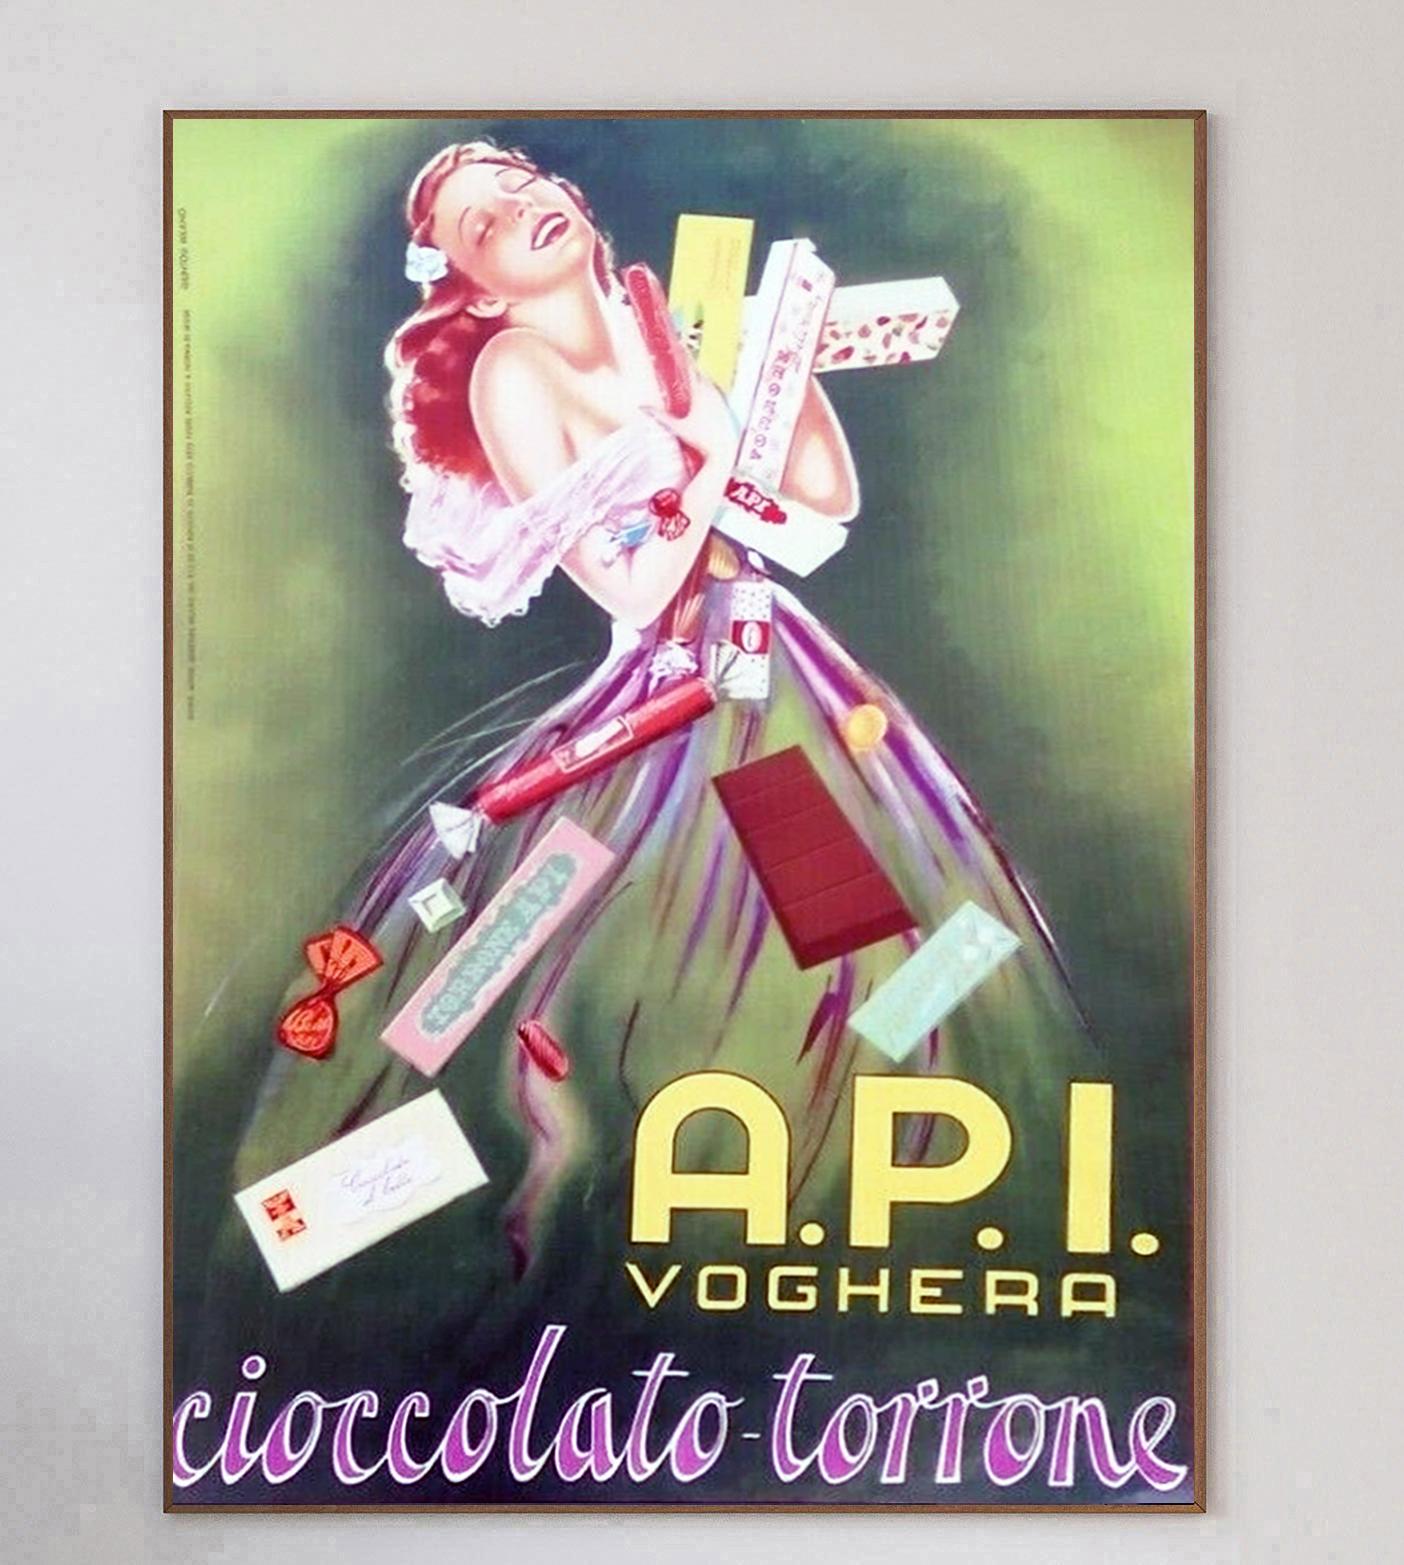 Gorgeous poster promoting the Cioccolato-Torrone or Chocolate and Nougat of API of Voghera in Lombardy, Italy. Created in 1955, this poster depicts a woman being showered by confectionary and chocolates to her great delight.

The wonderful design is